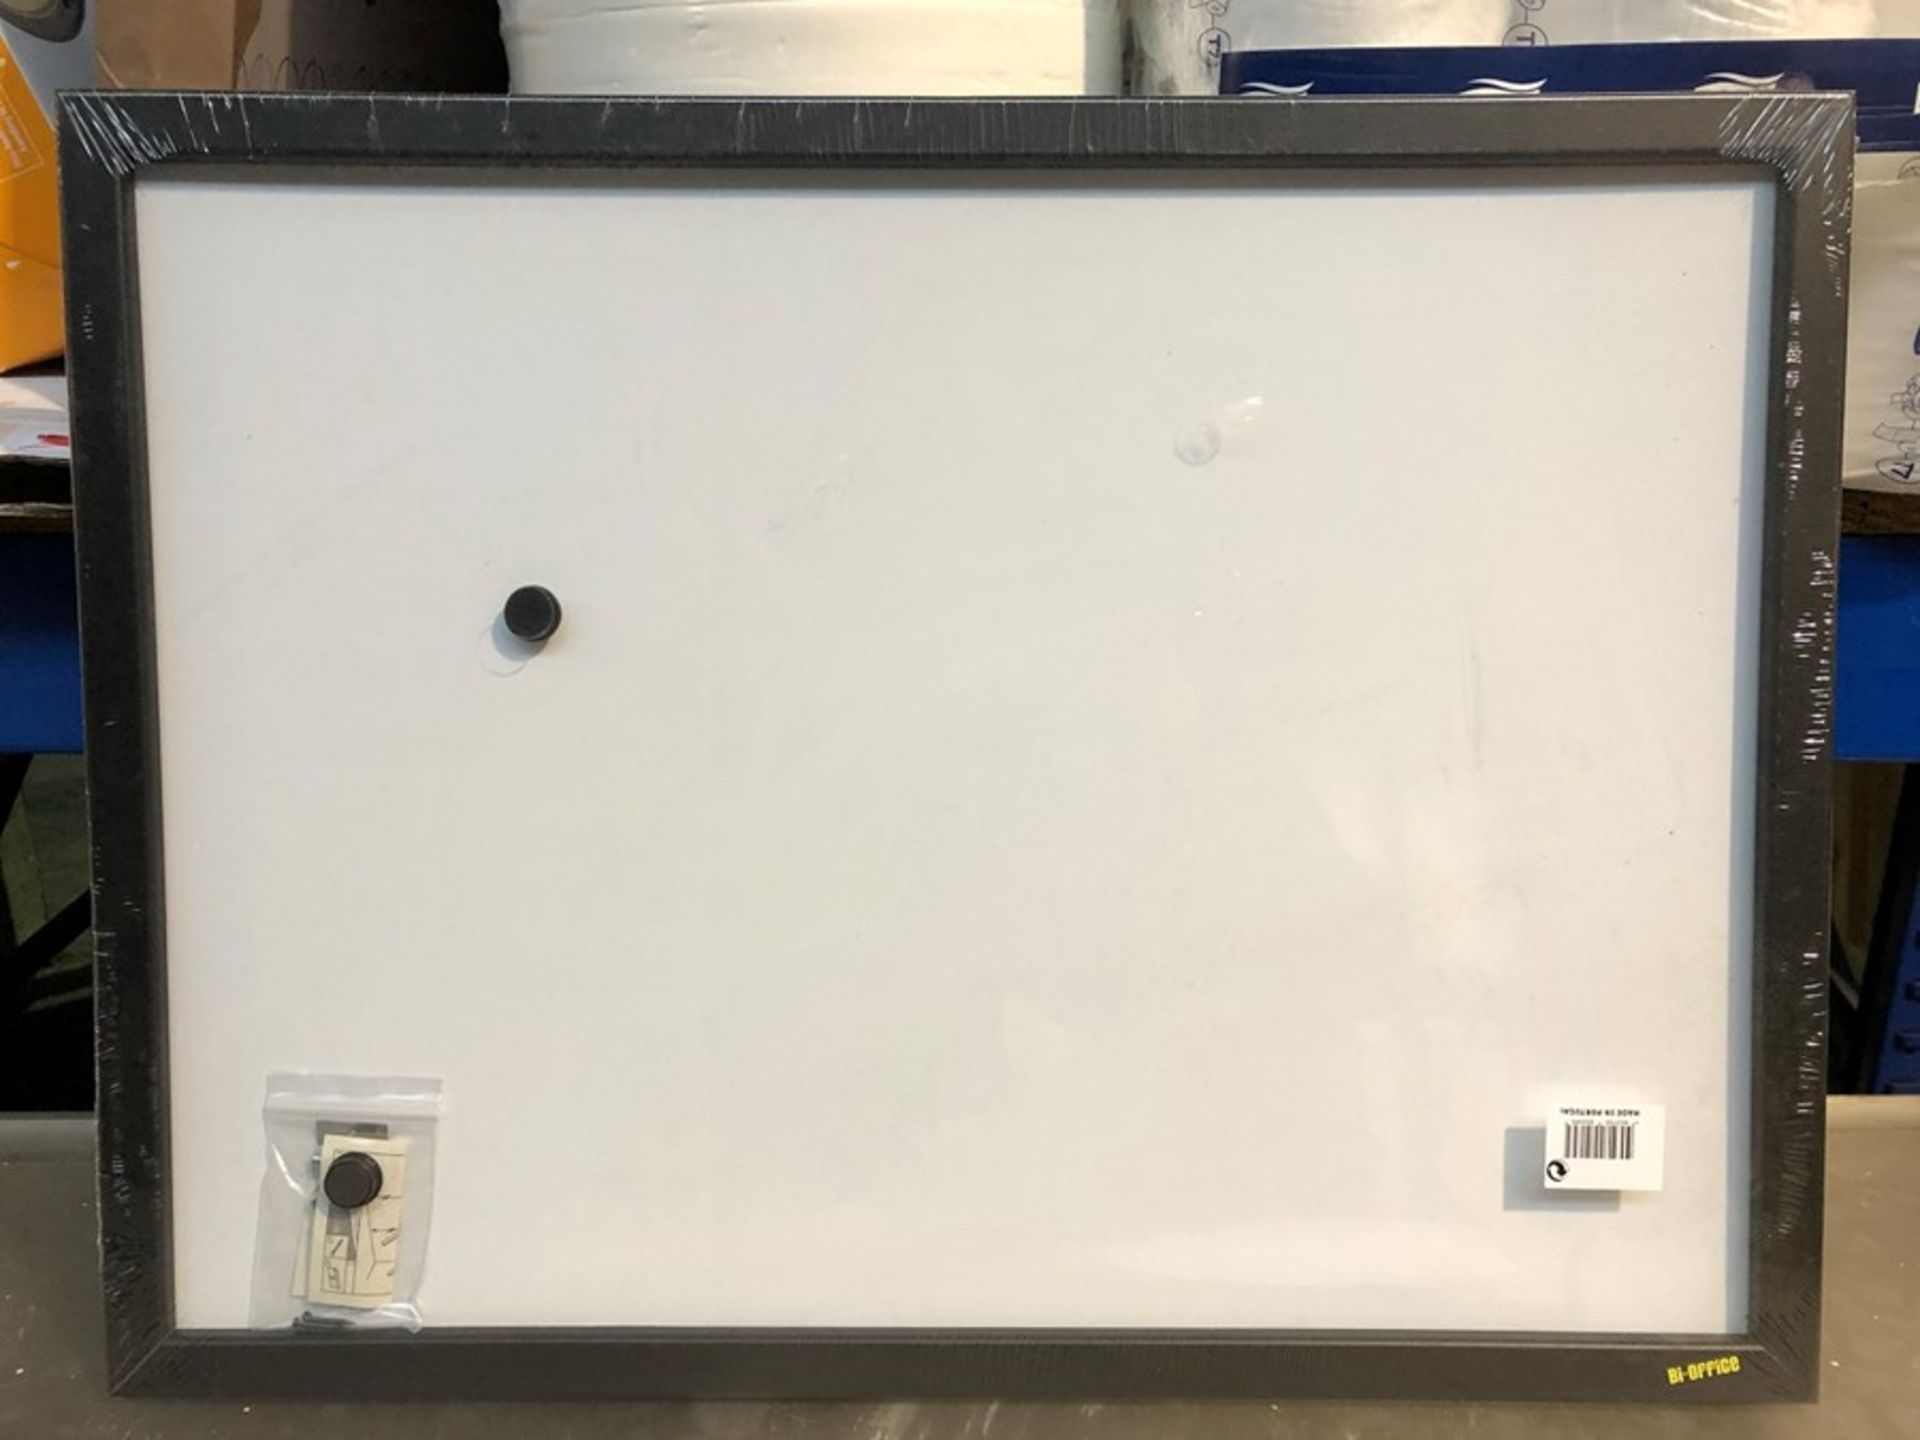 1 SEALED BI-OFFICE MAGNETIC WHITEBOARD WITH MATCHING SCREWS AND MAGNETS (PUBLIC VIEWING AVAILABLE)